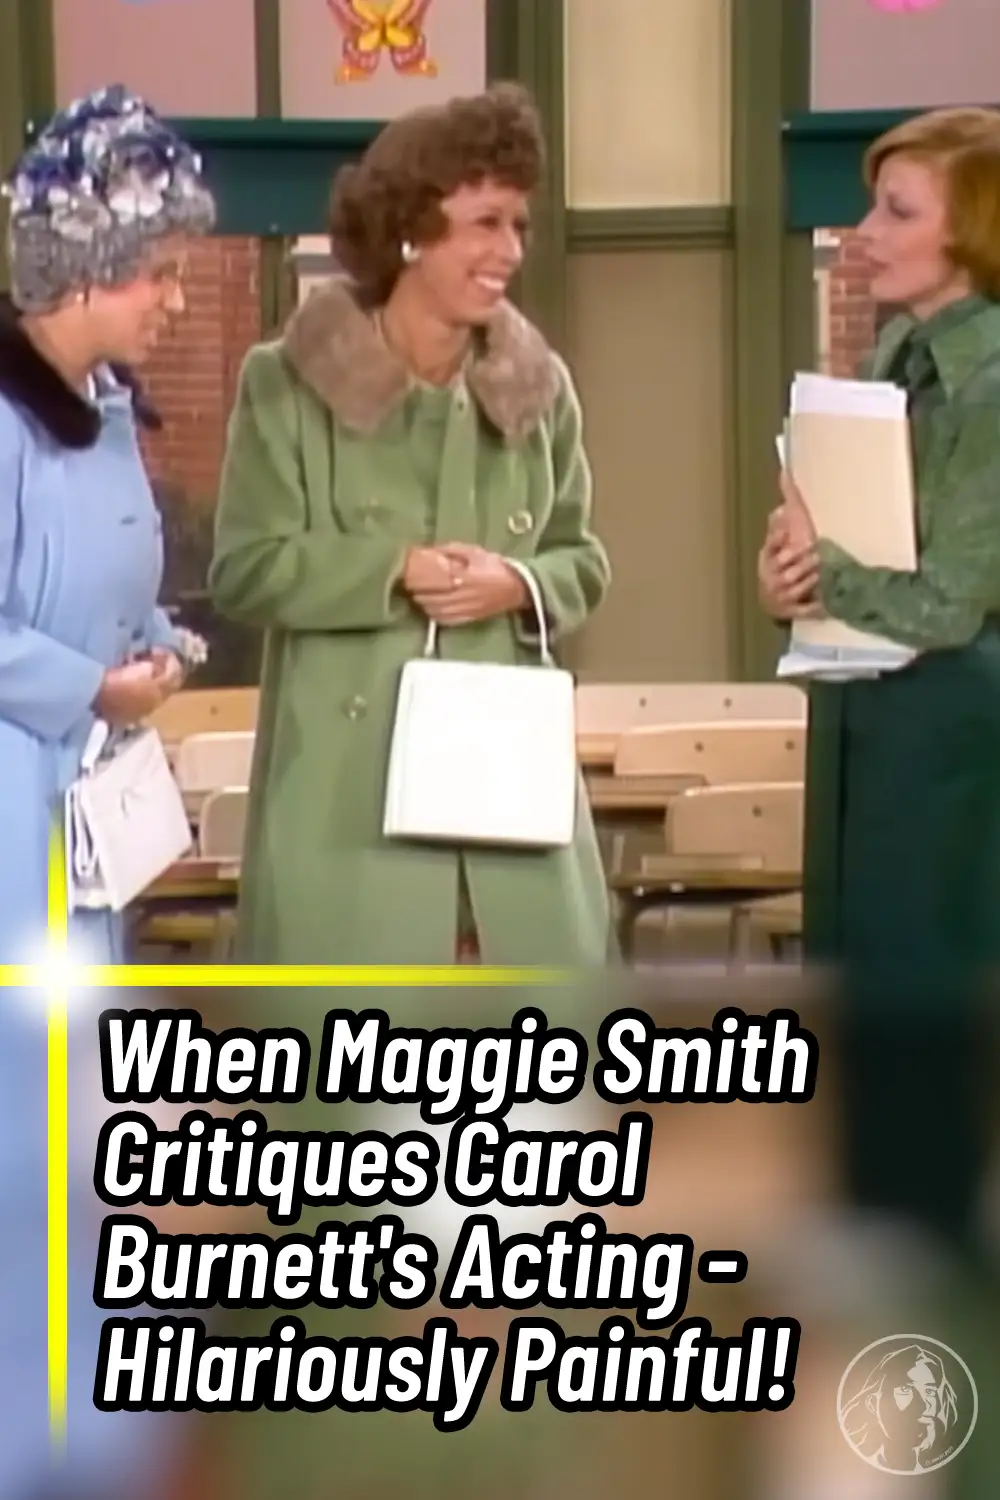 When Maggie Smith Critiques Carol Burnett\'s Acting - Hilariously Painful!